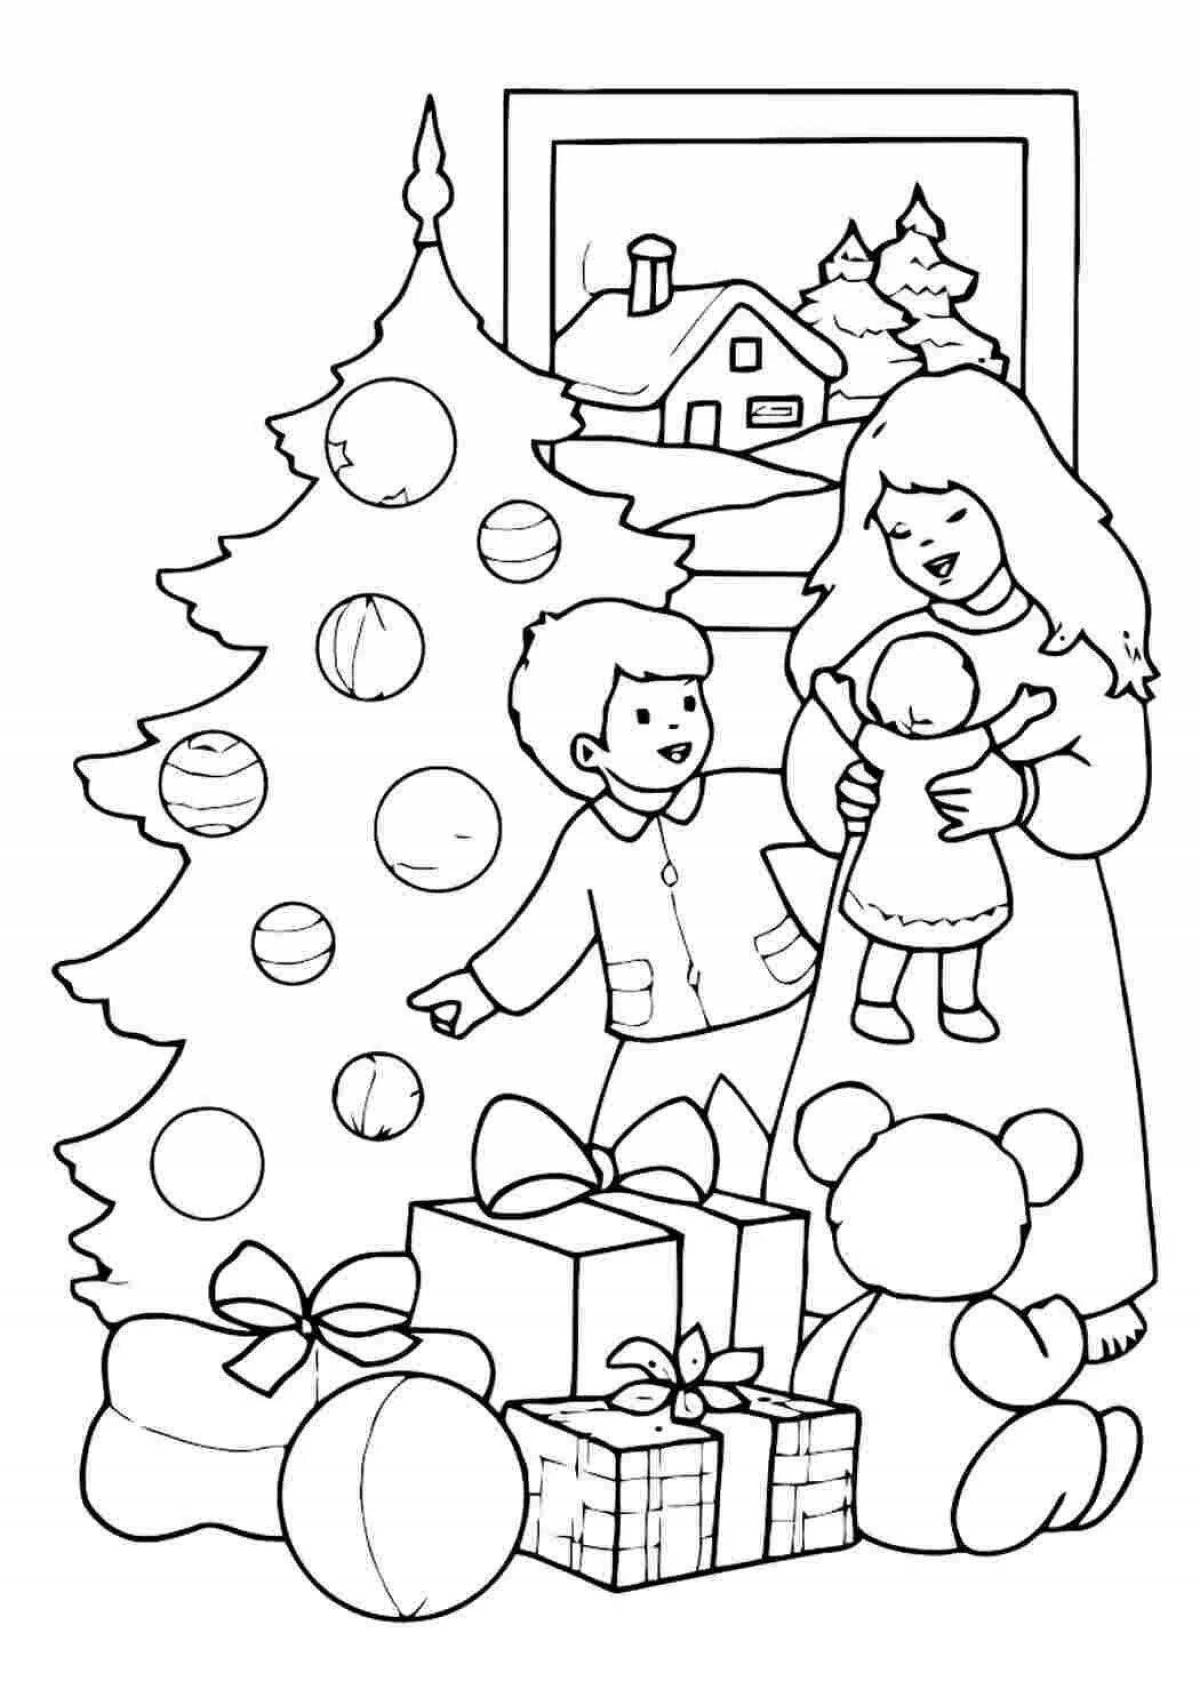 Radiant Christmas coloring book for children 4-5 years old